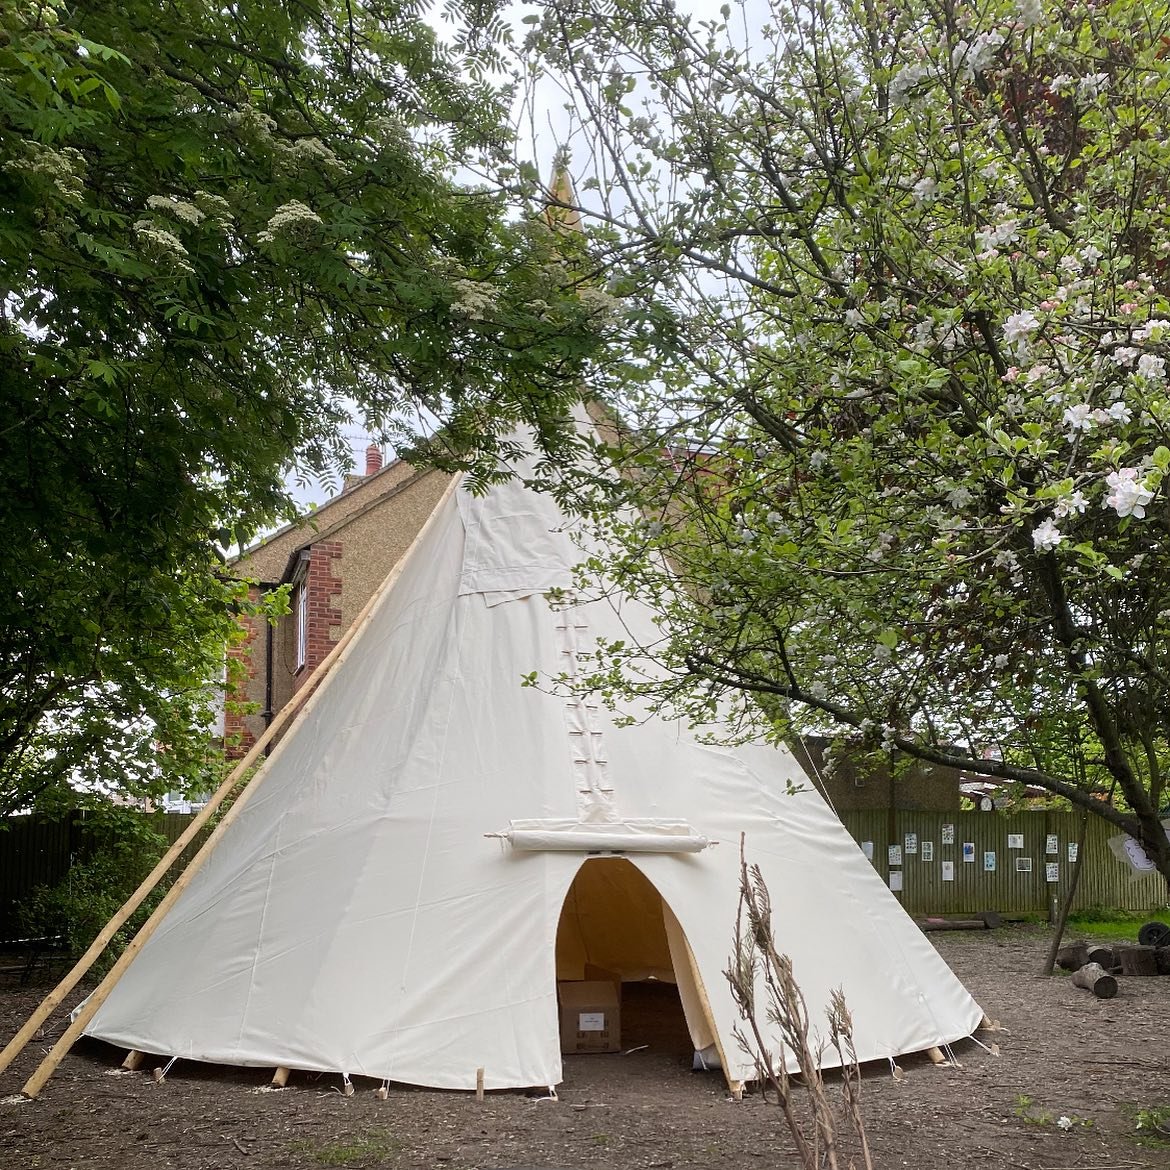 A lovely tipi set up for a primary school who have a beautiful forest school area. Very lucky children to have such a beautiful spot and now a tipi as a classroom space too! 

We LOVE making tipis for organisations where children will get to enjoy th